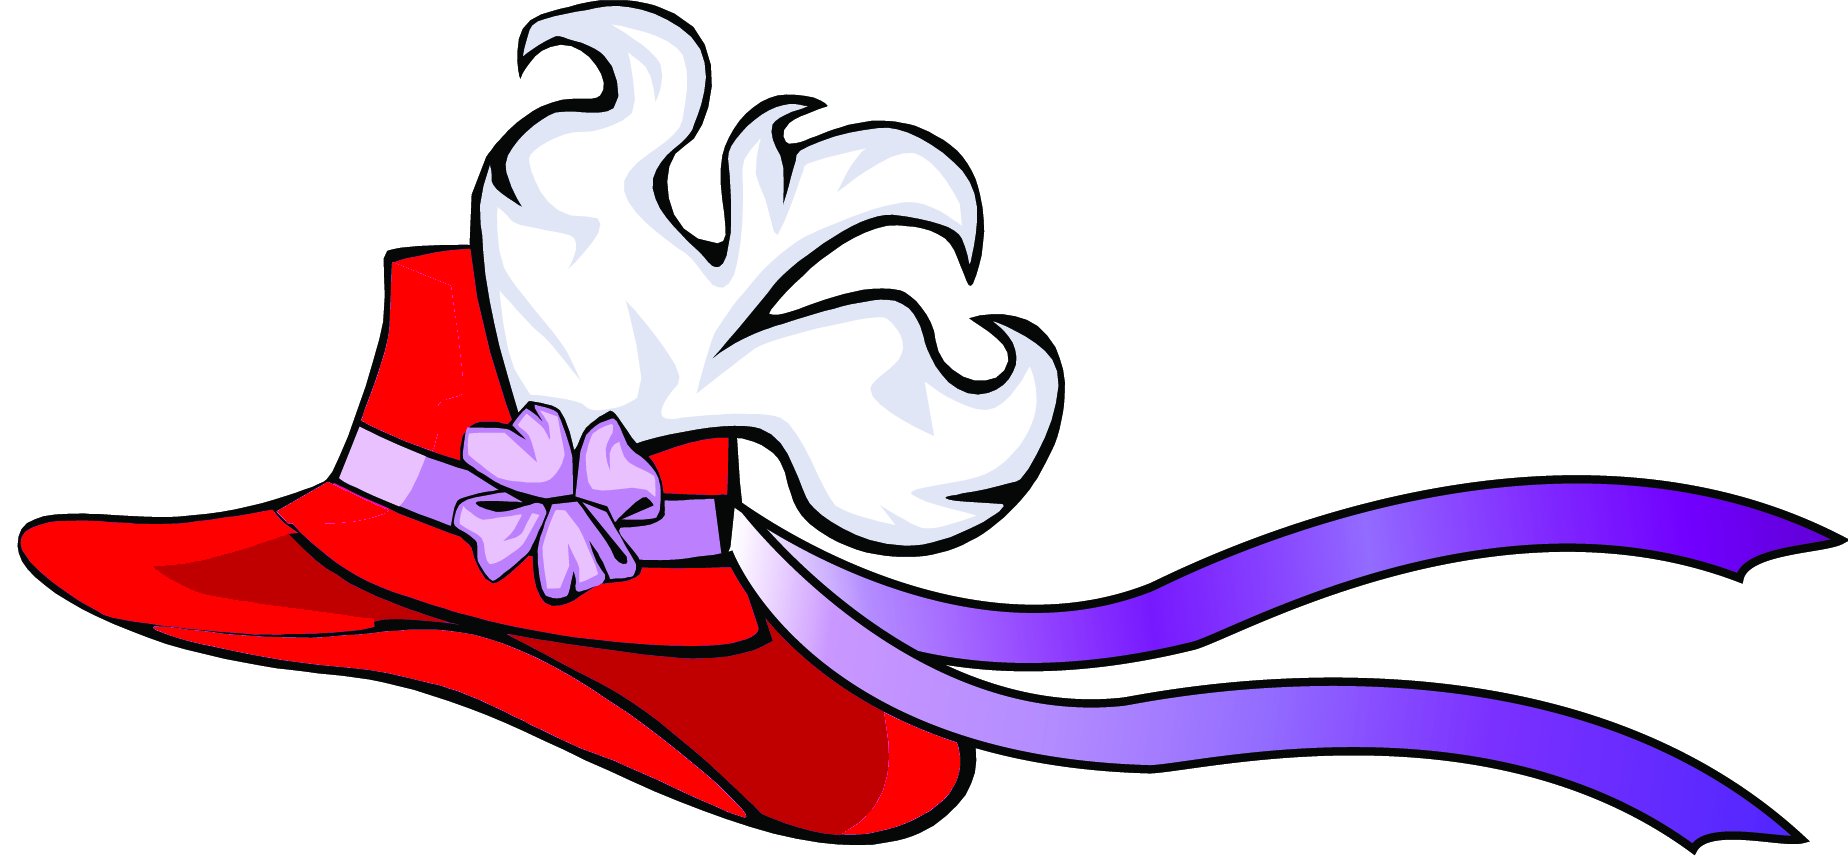 1000+ images about RED HAT SOCIETY